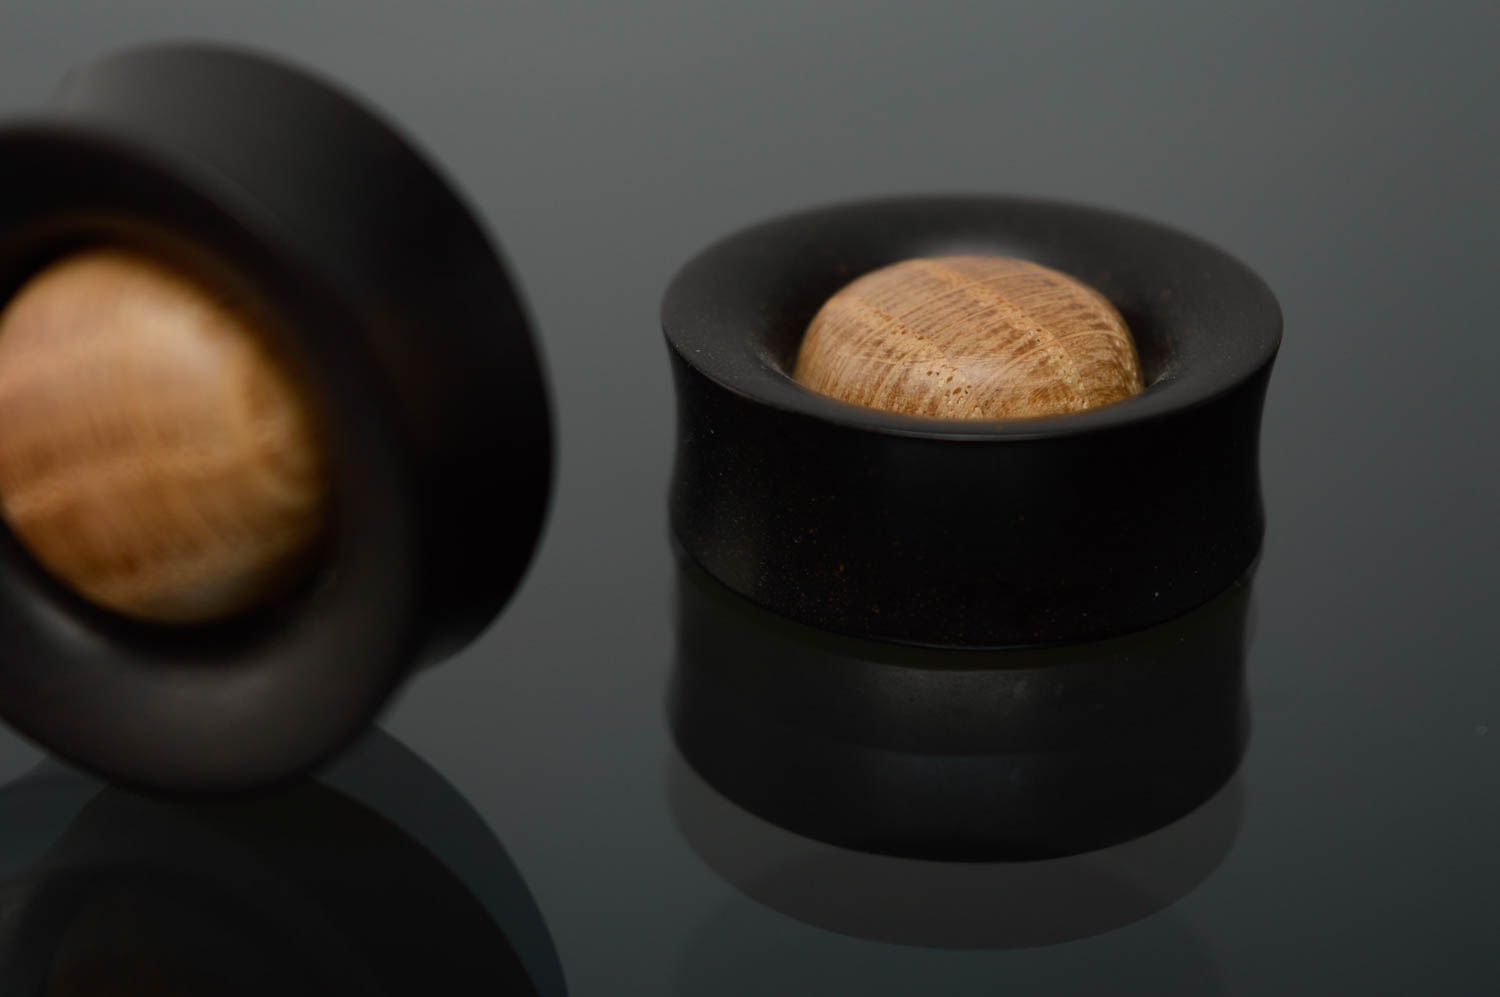 Wood and hard rubber plugs photo 5